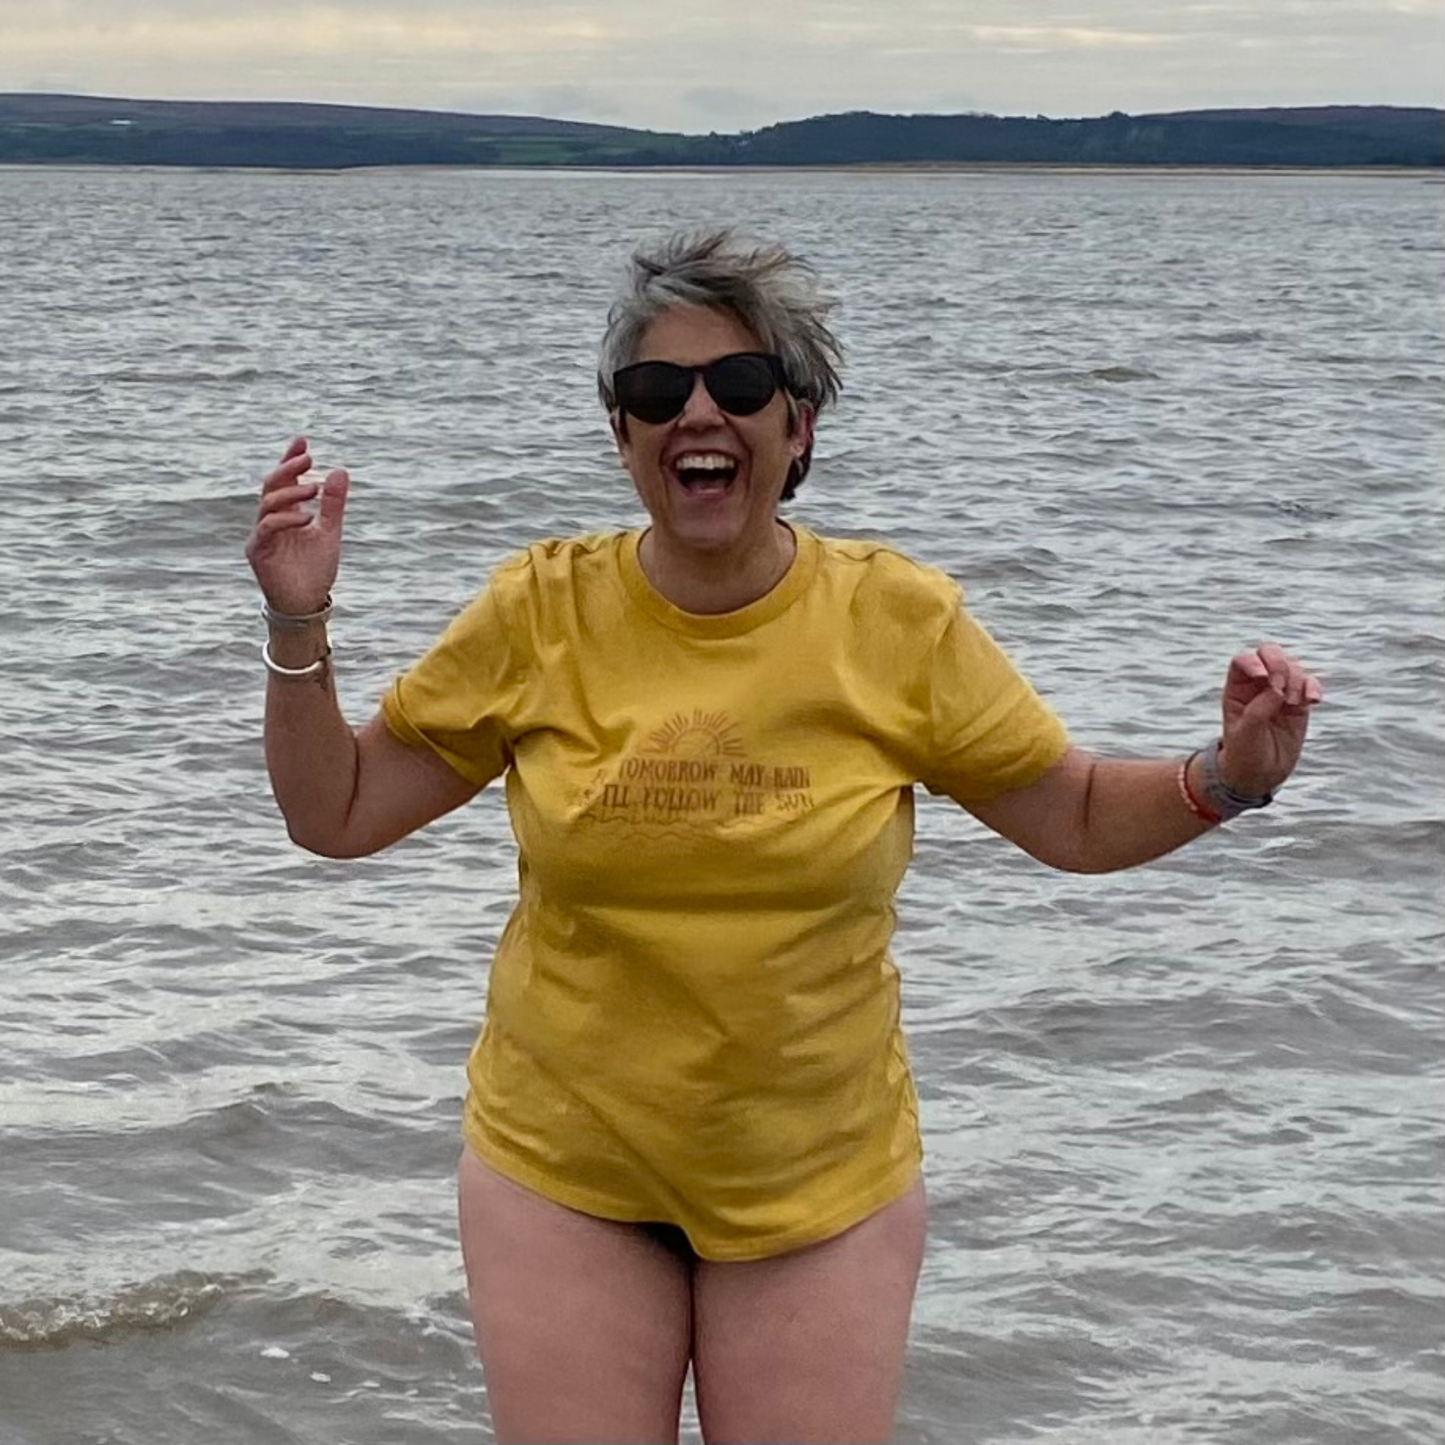 A woman laughing and dancing in the sea wearing a vintage gold t-shirt and sunglasses.